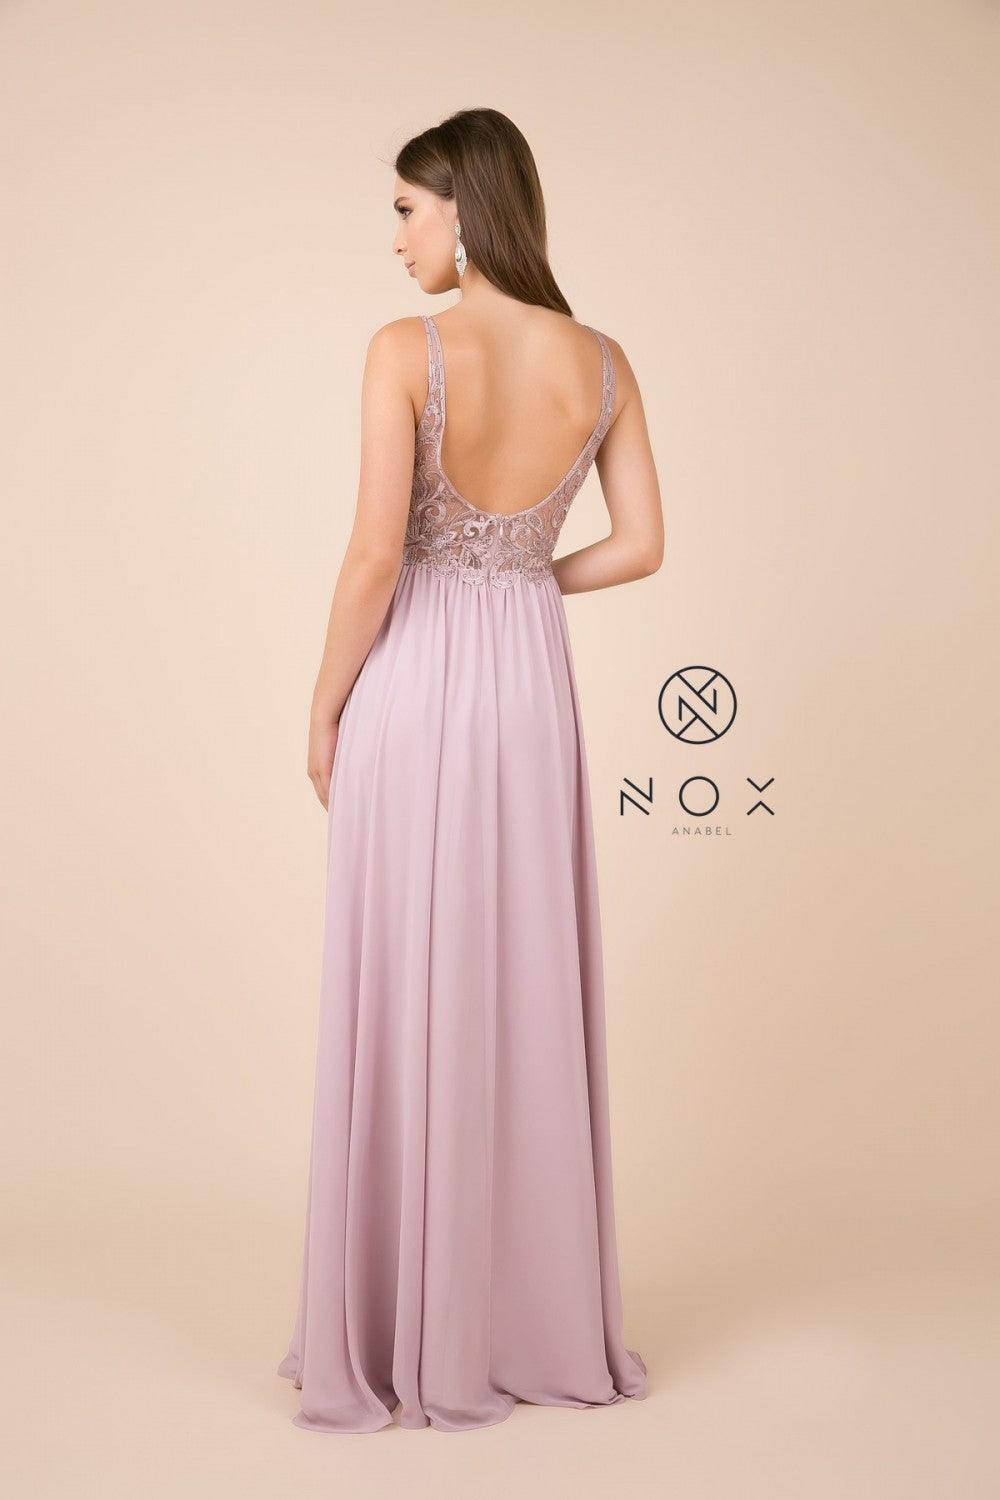 Long Sleevelees Formal Dress Prom - The Dress Outlet Nox Anabel